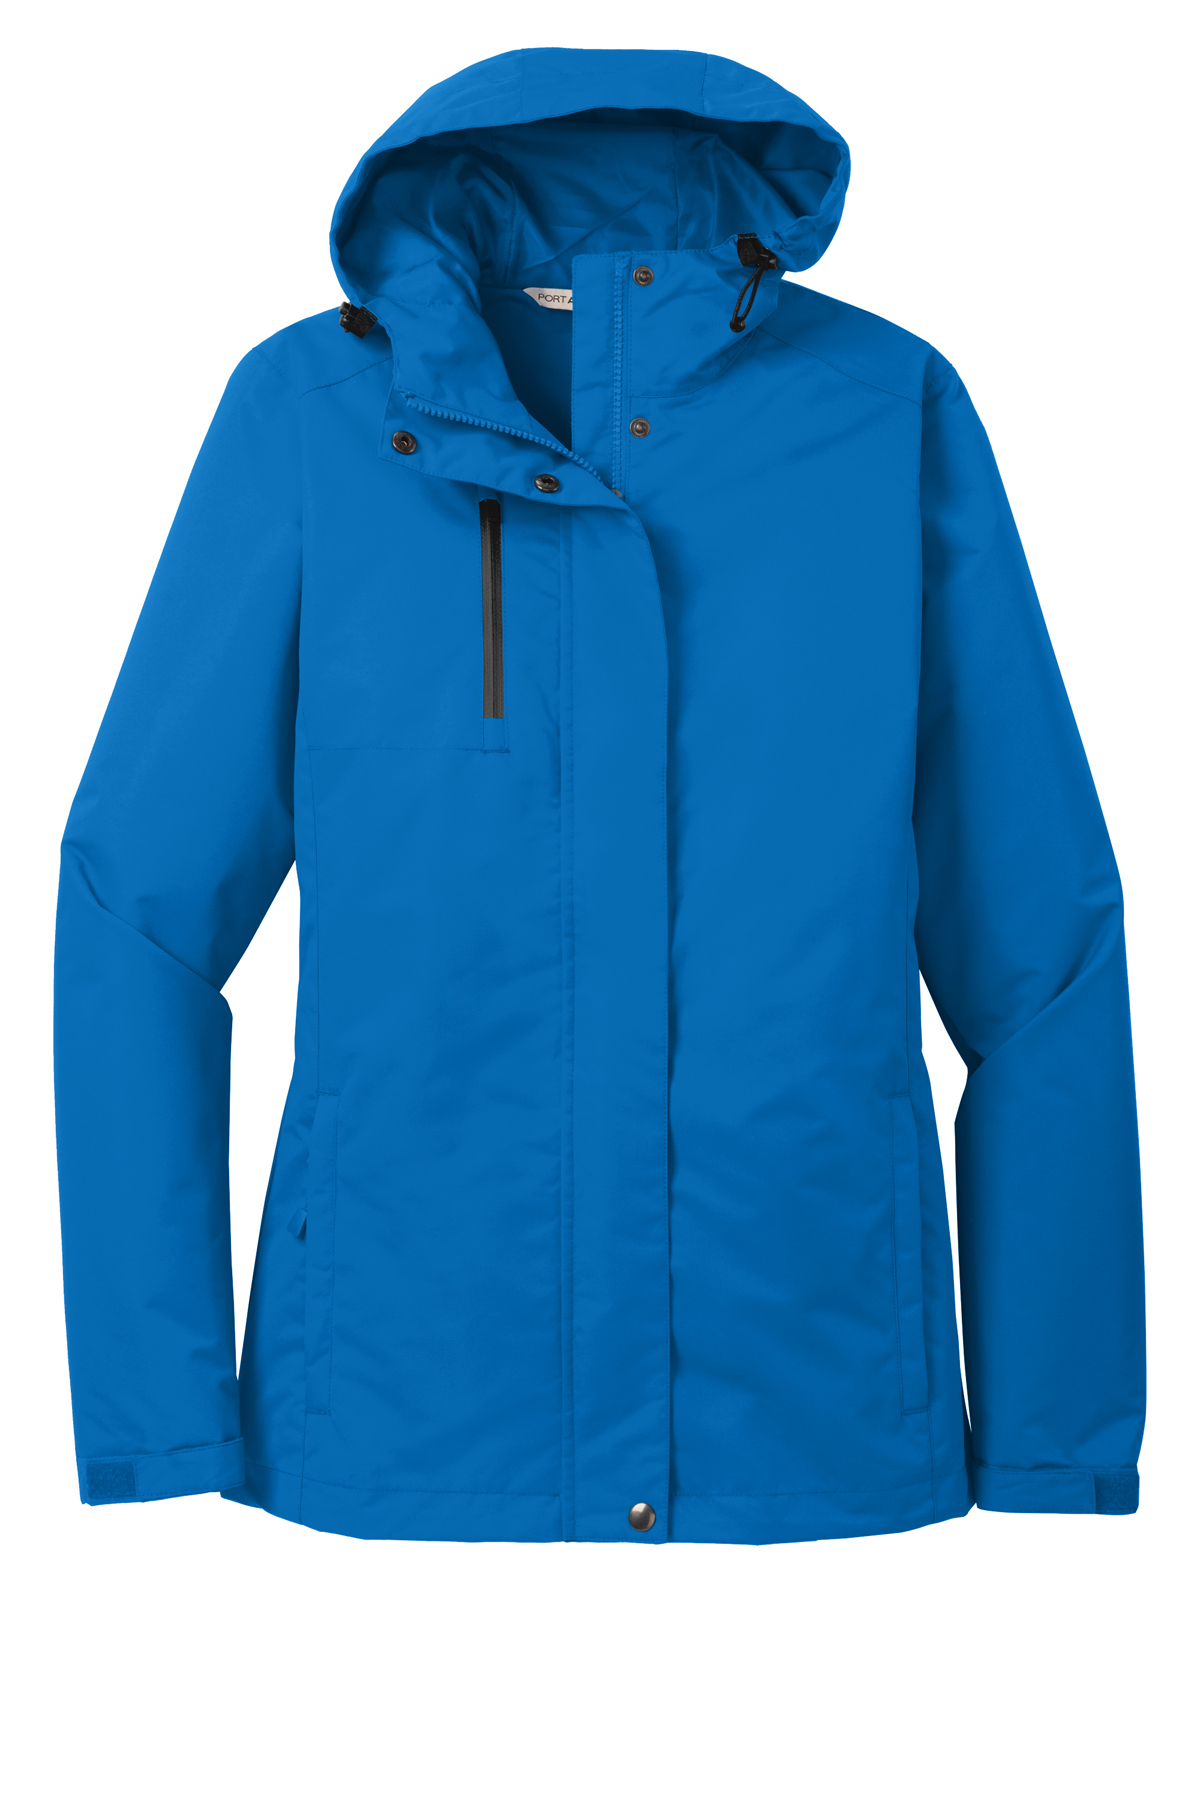 | Port Ladies | All-Conditions SanMar Product Authority Jacket